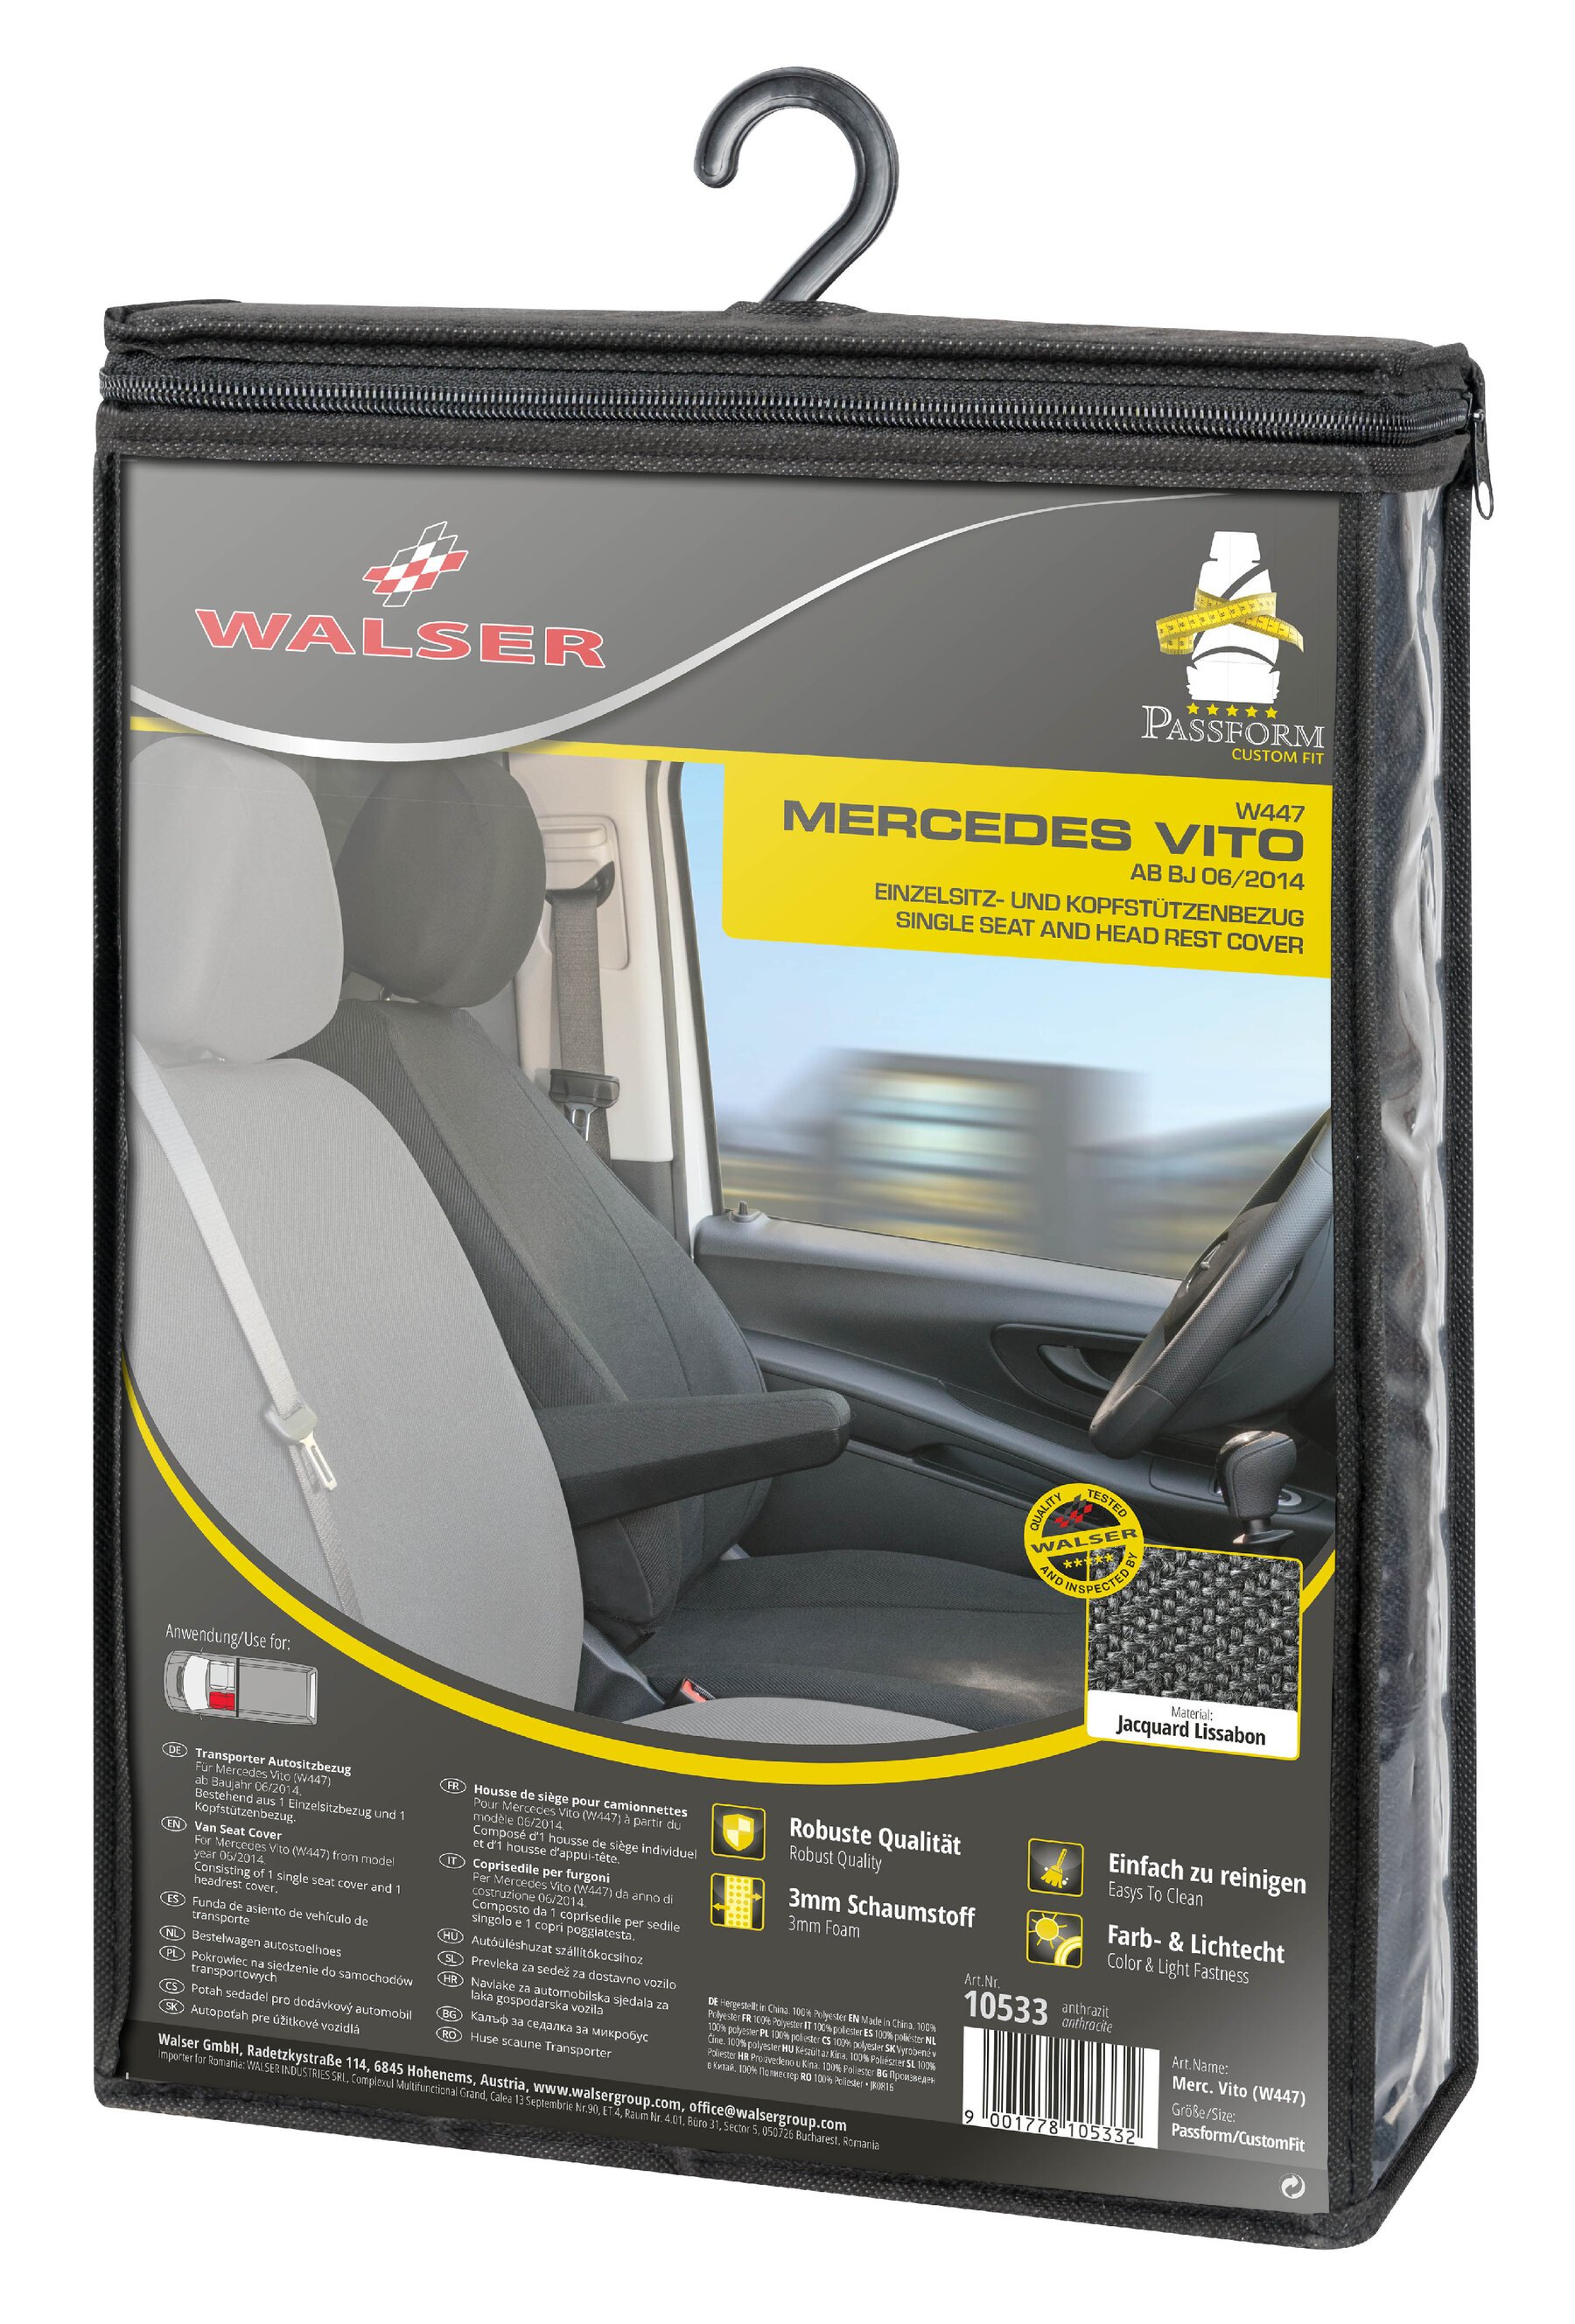 Seat cover made of fabric for Mercedes Vito 447, single seat with armrest inside